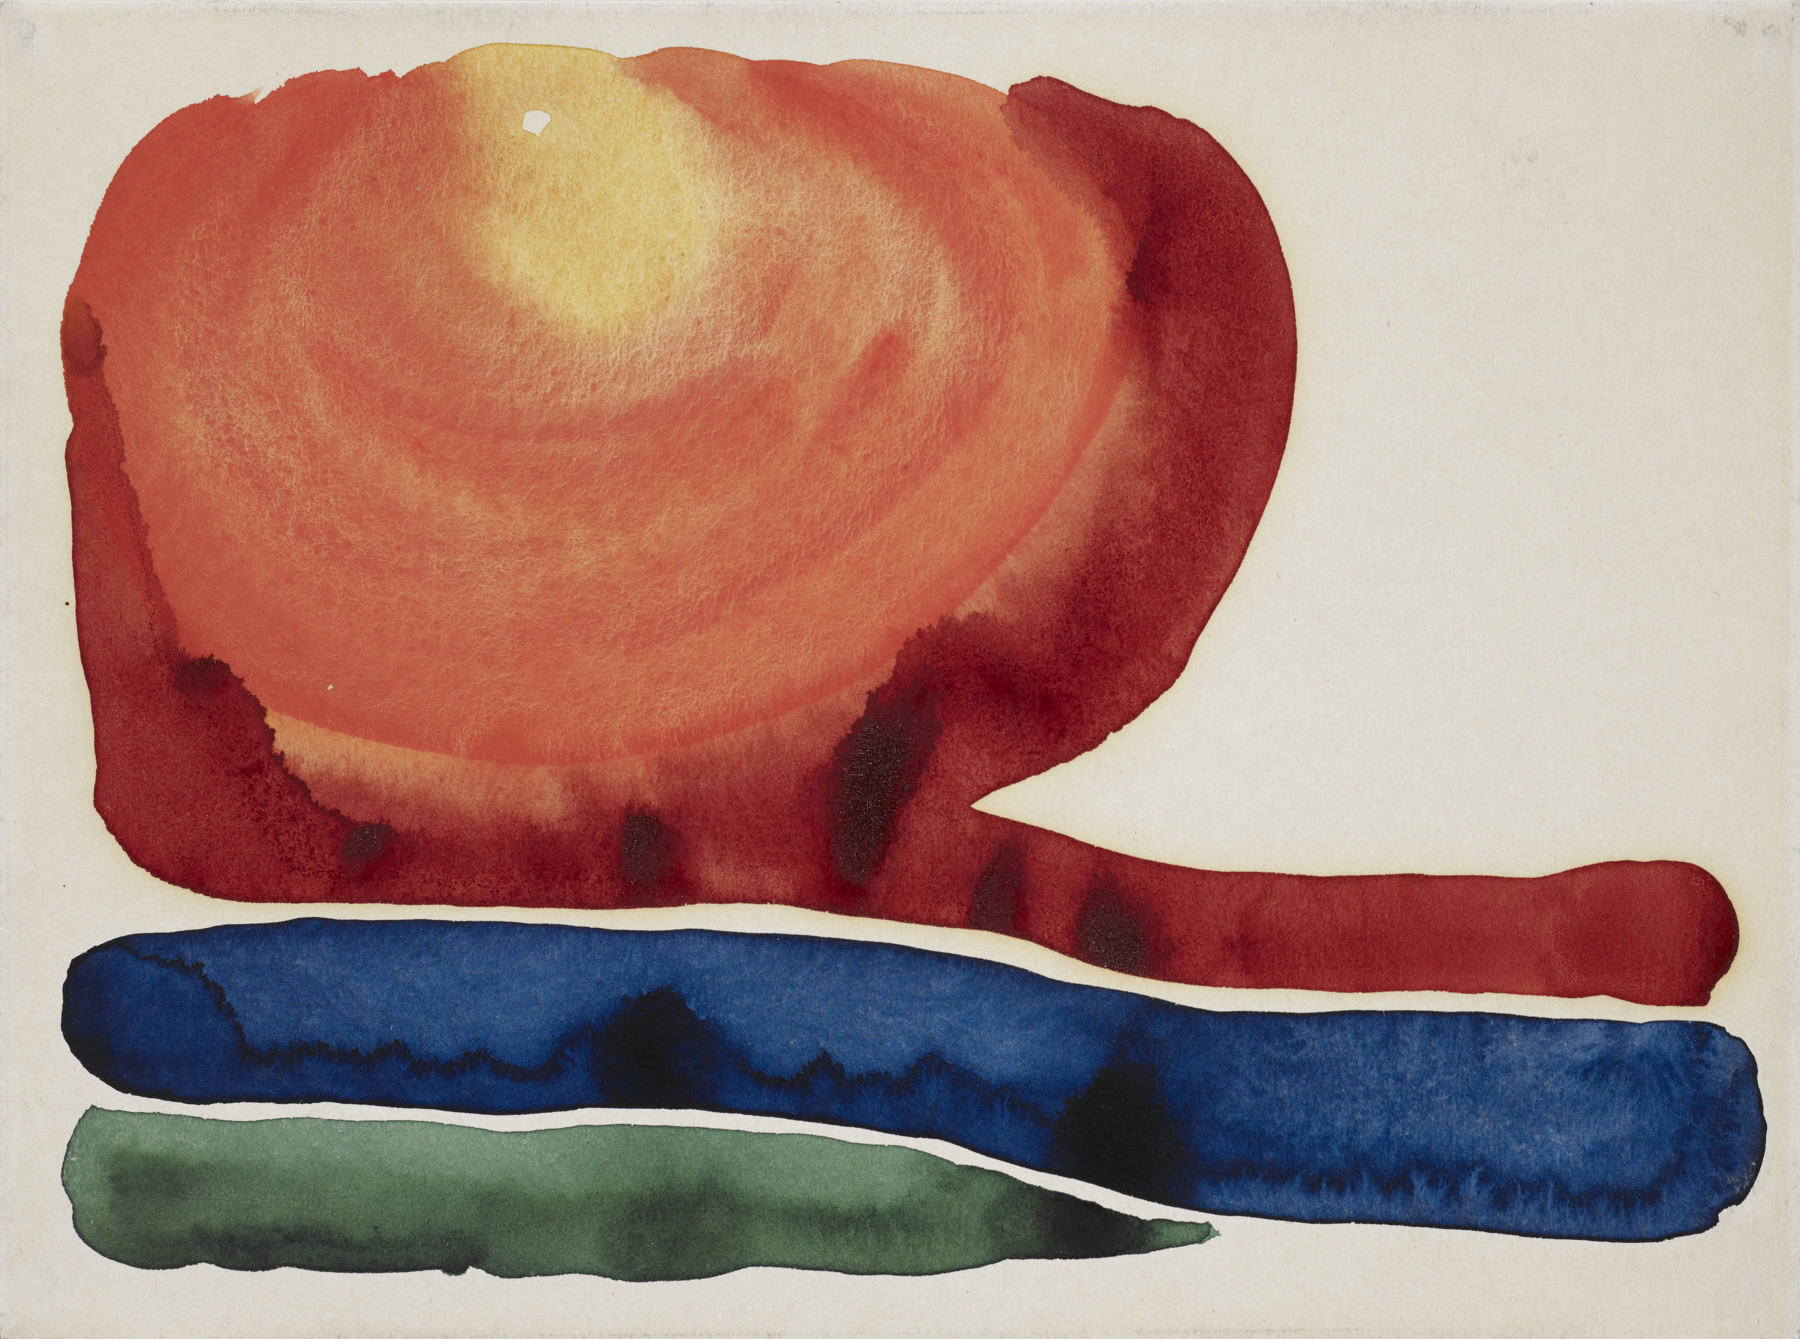 Georgia O’Keeffe. Evening Star No. II, 1917. Watercolor on paper. 8 3/4 × 12  (22.2 × 30.5 cm). Courtesy Crystal Bridges Museum of American Art, Bentonville, Arkansas. Photography by Dwight Primiano.   2022 Georgia O’Keeffe Museum / Artists Rights Society (ARS), New York